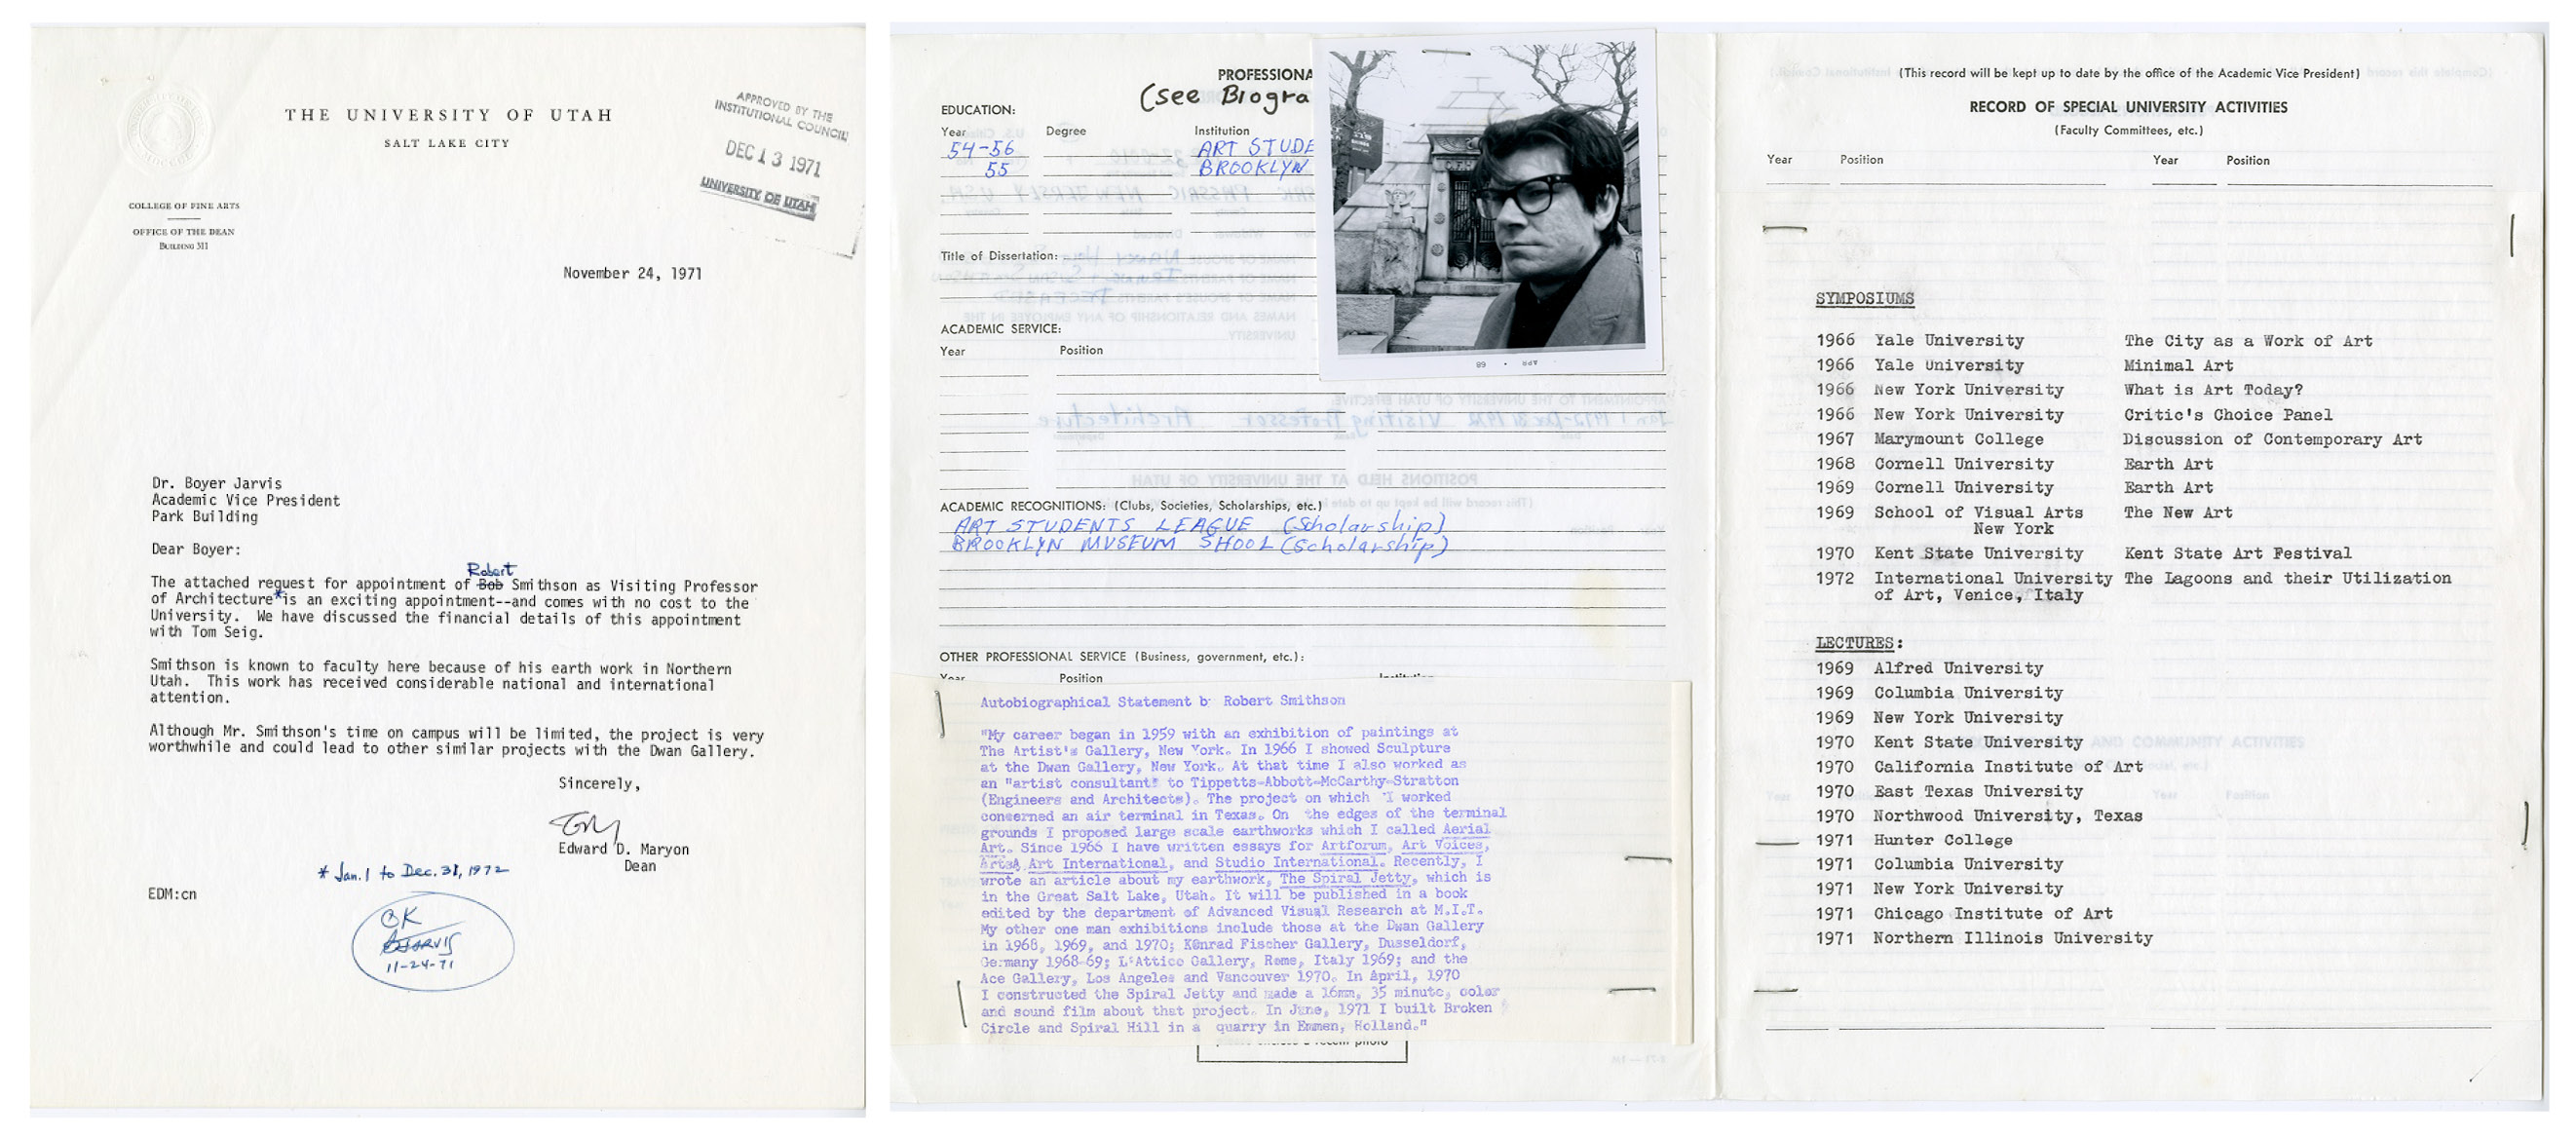 Robert Smithson faculty appointment files from University of Utah